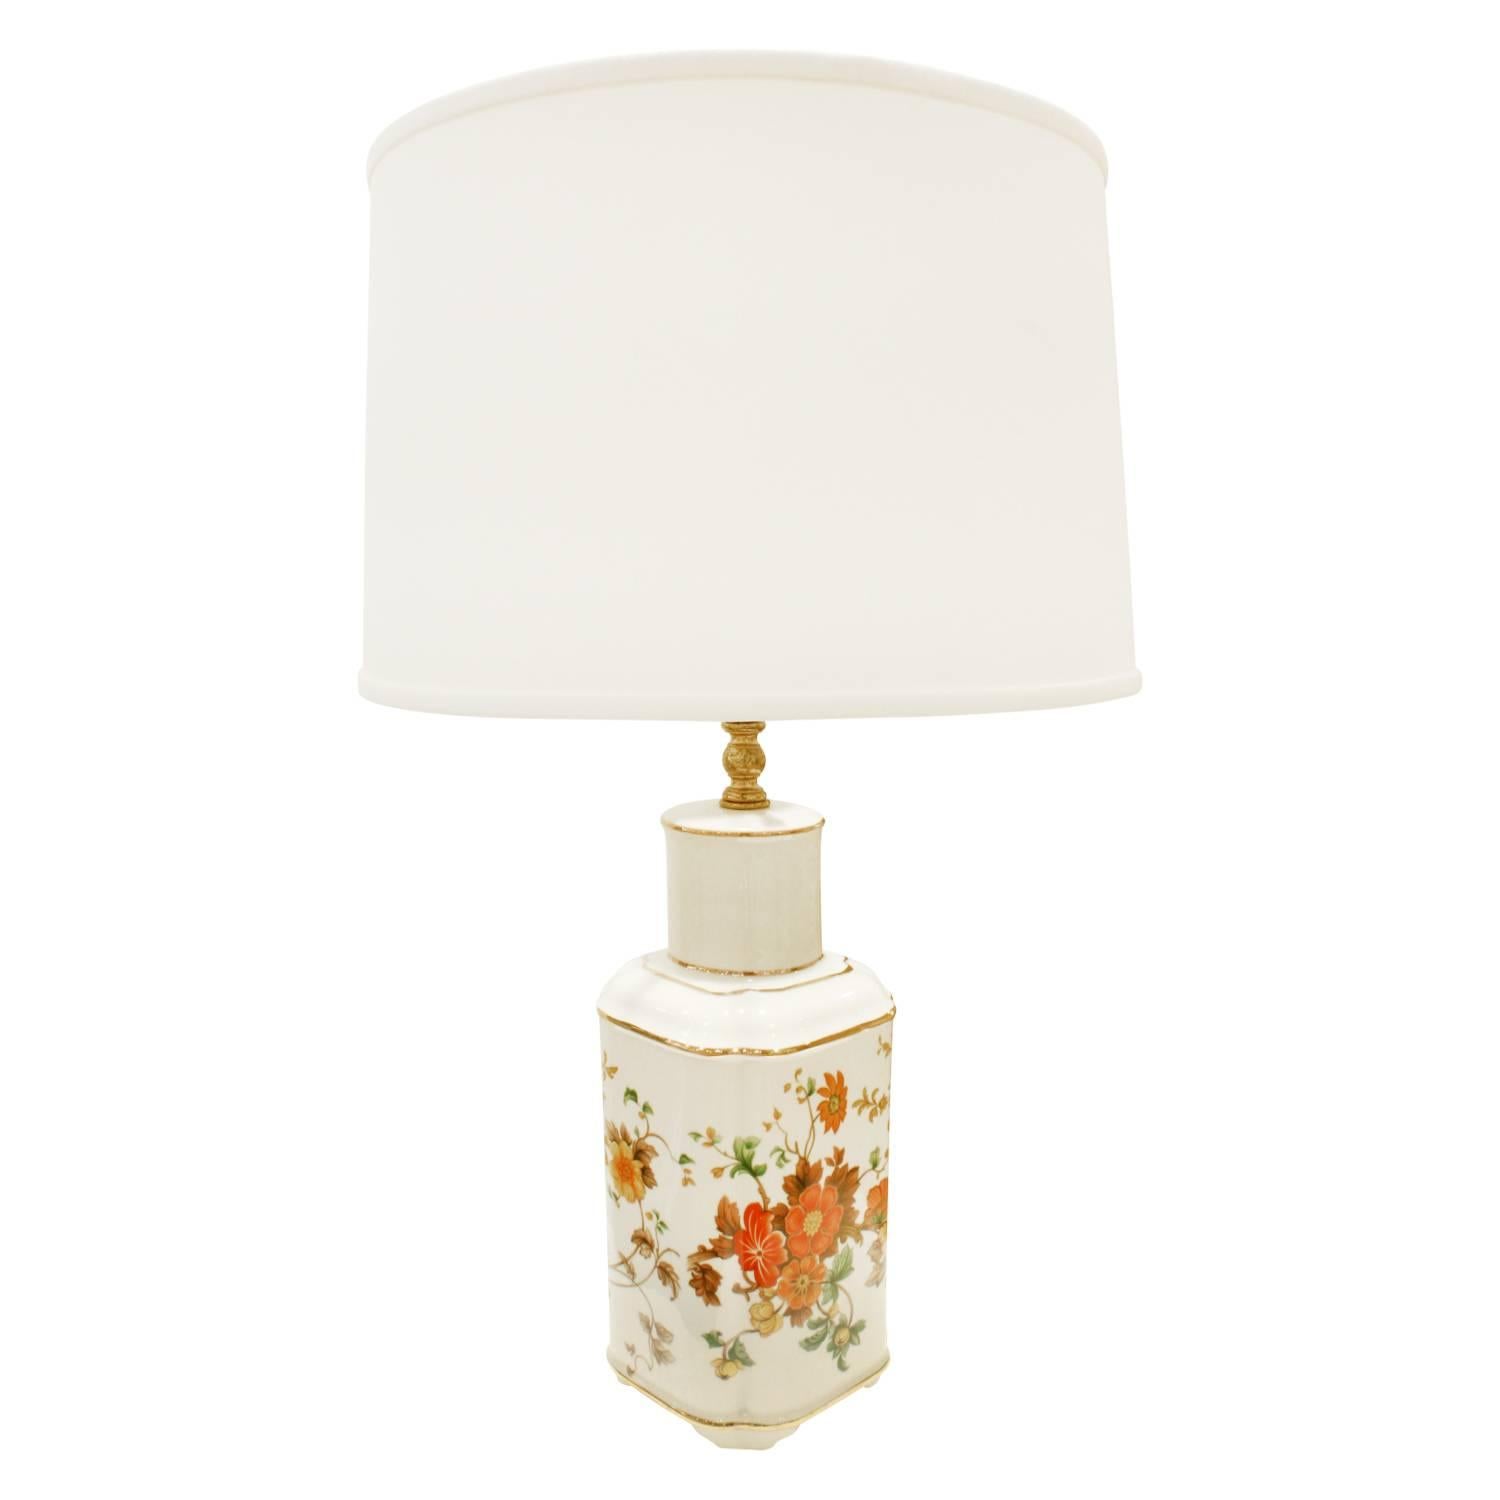 Small artisan porcelain table lamp with hand-painted flowers and gold accents, American 1960s (signed on bottom in gold 